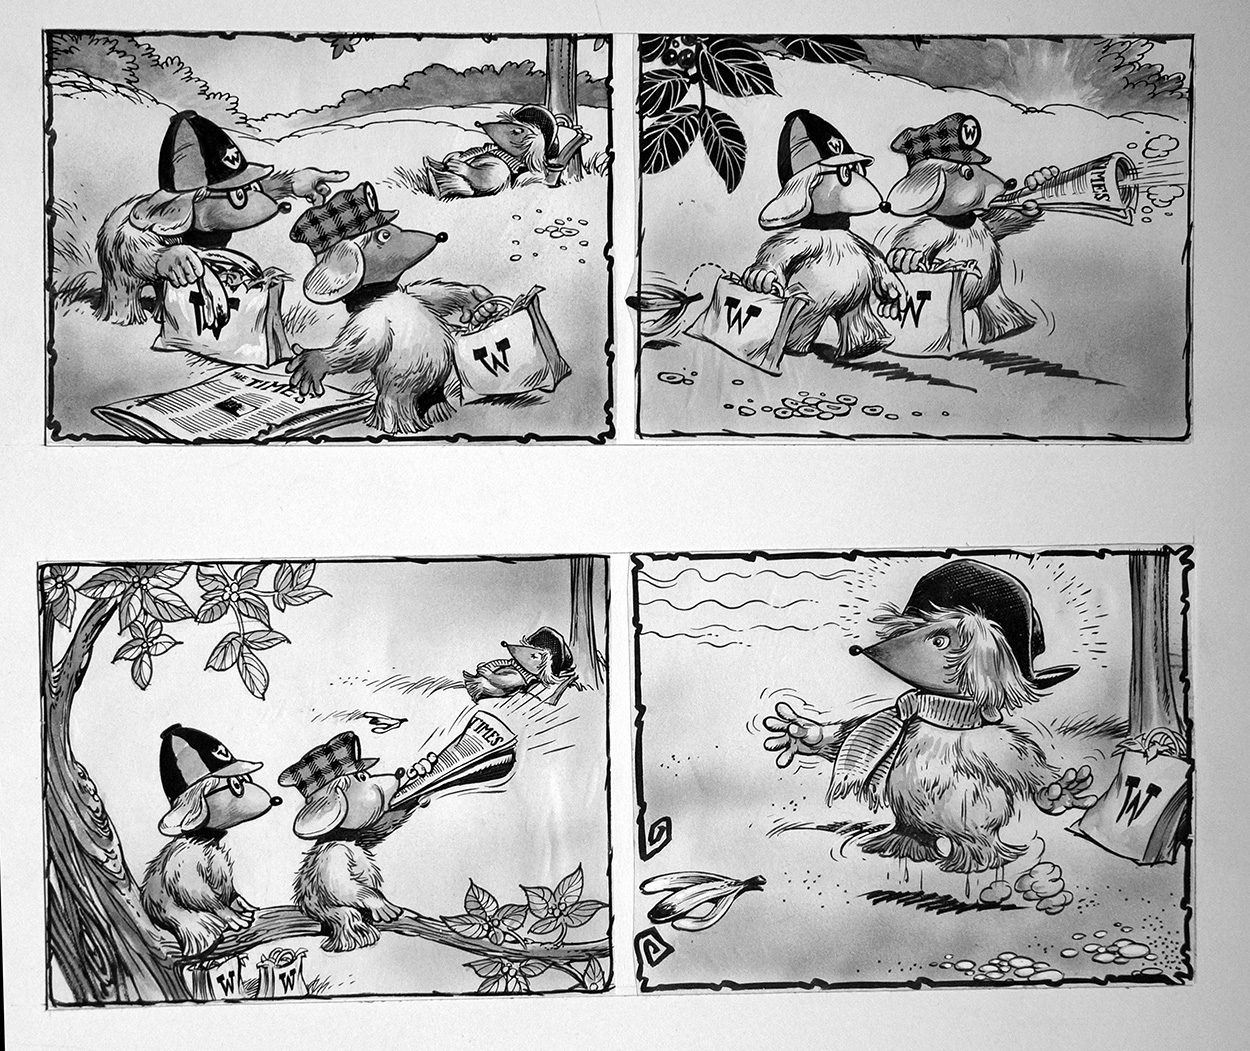 The Wombles: Wake Up Call (TWO pages) (Originals) art by The Wombles (Blasco) at The Illustration Art Gallery